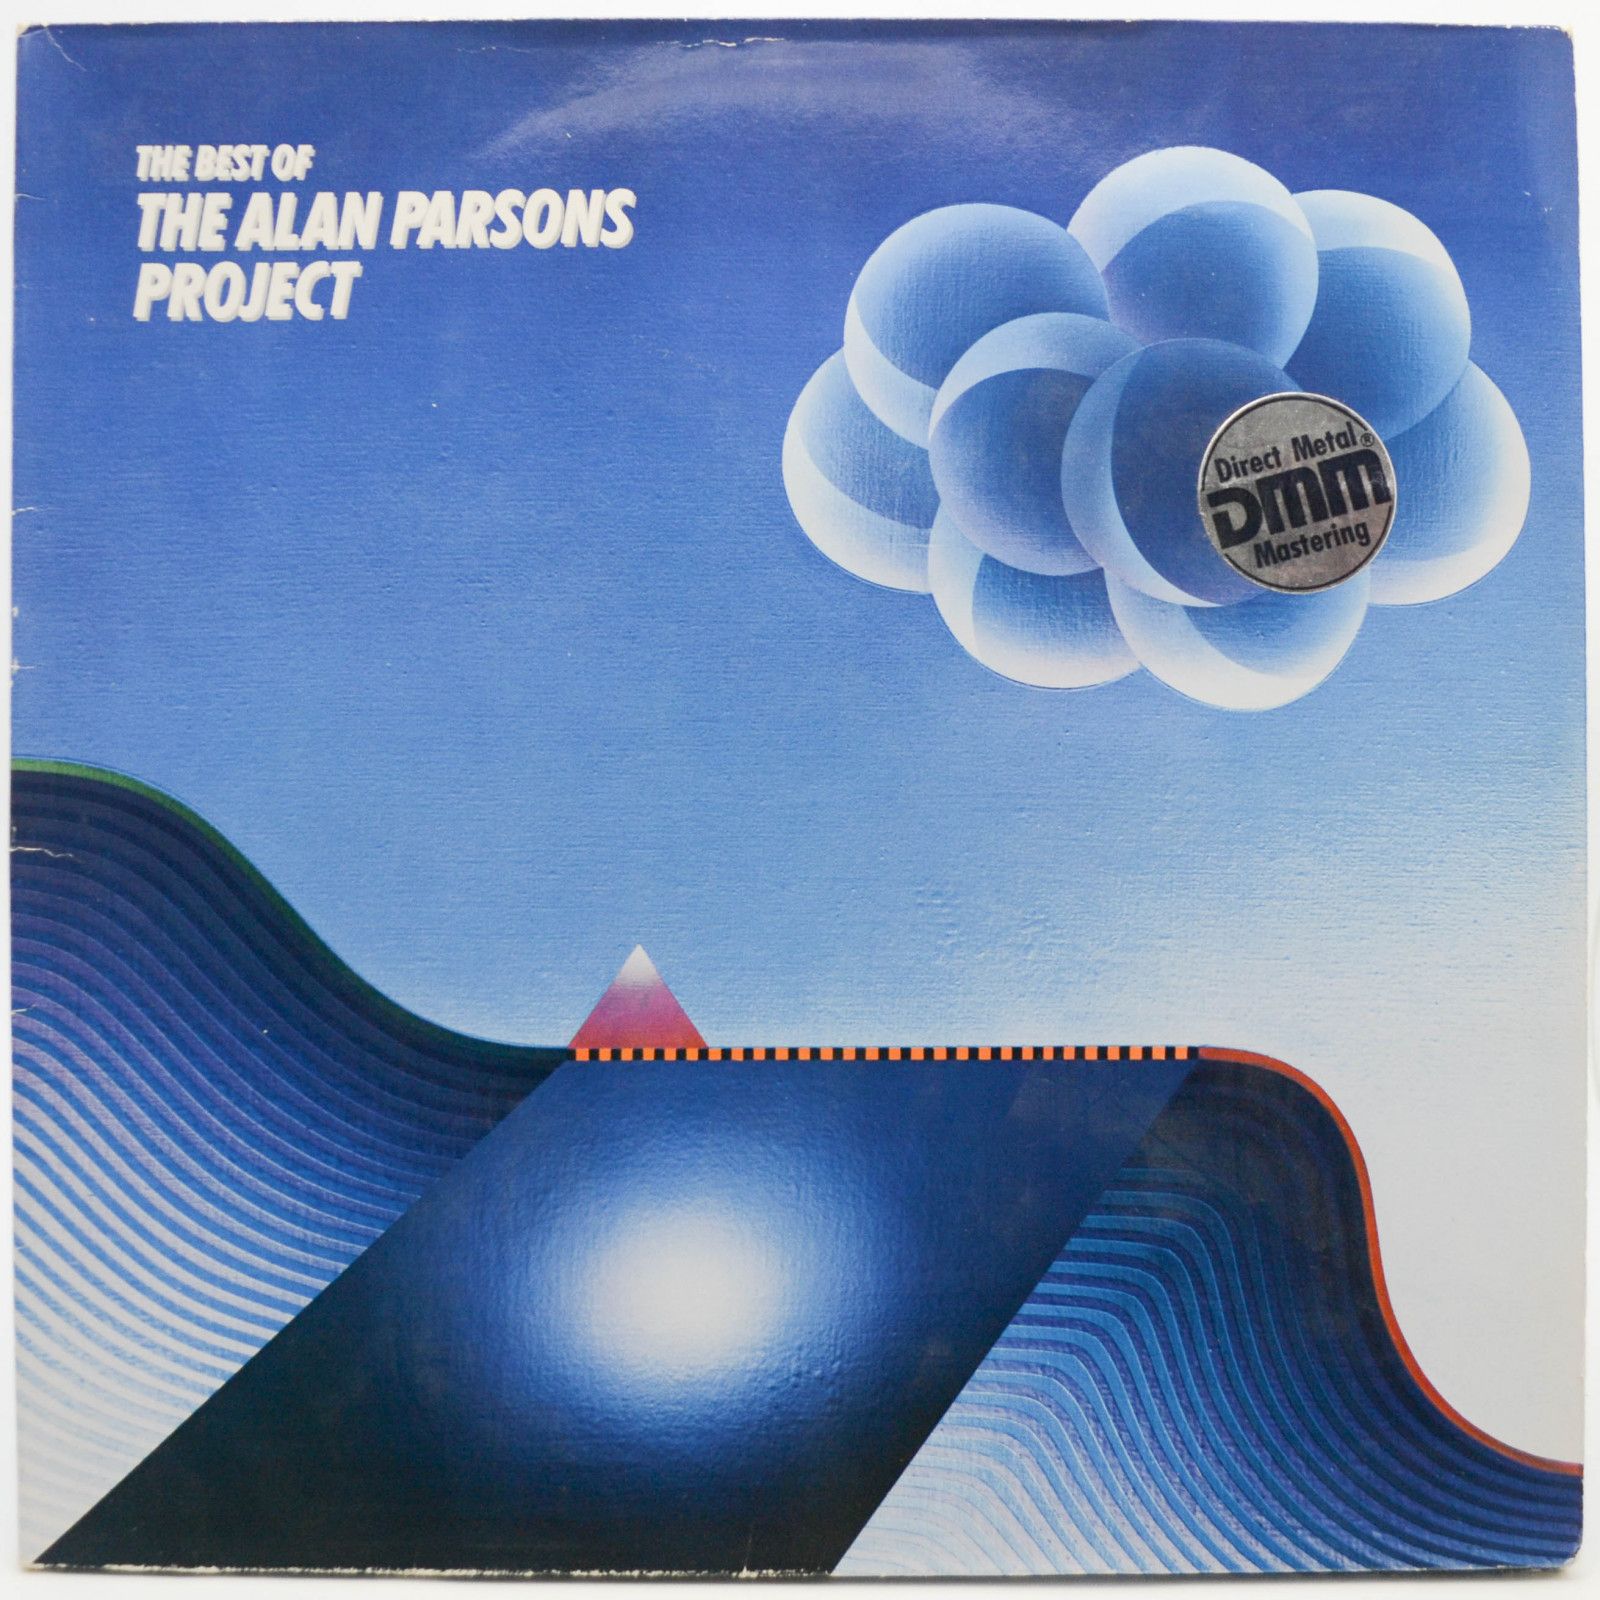 Alan Parsons Project — The Best Of The Alan Parsons Project, 1983